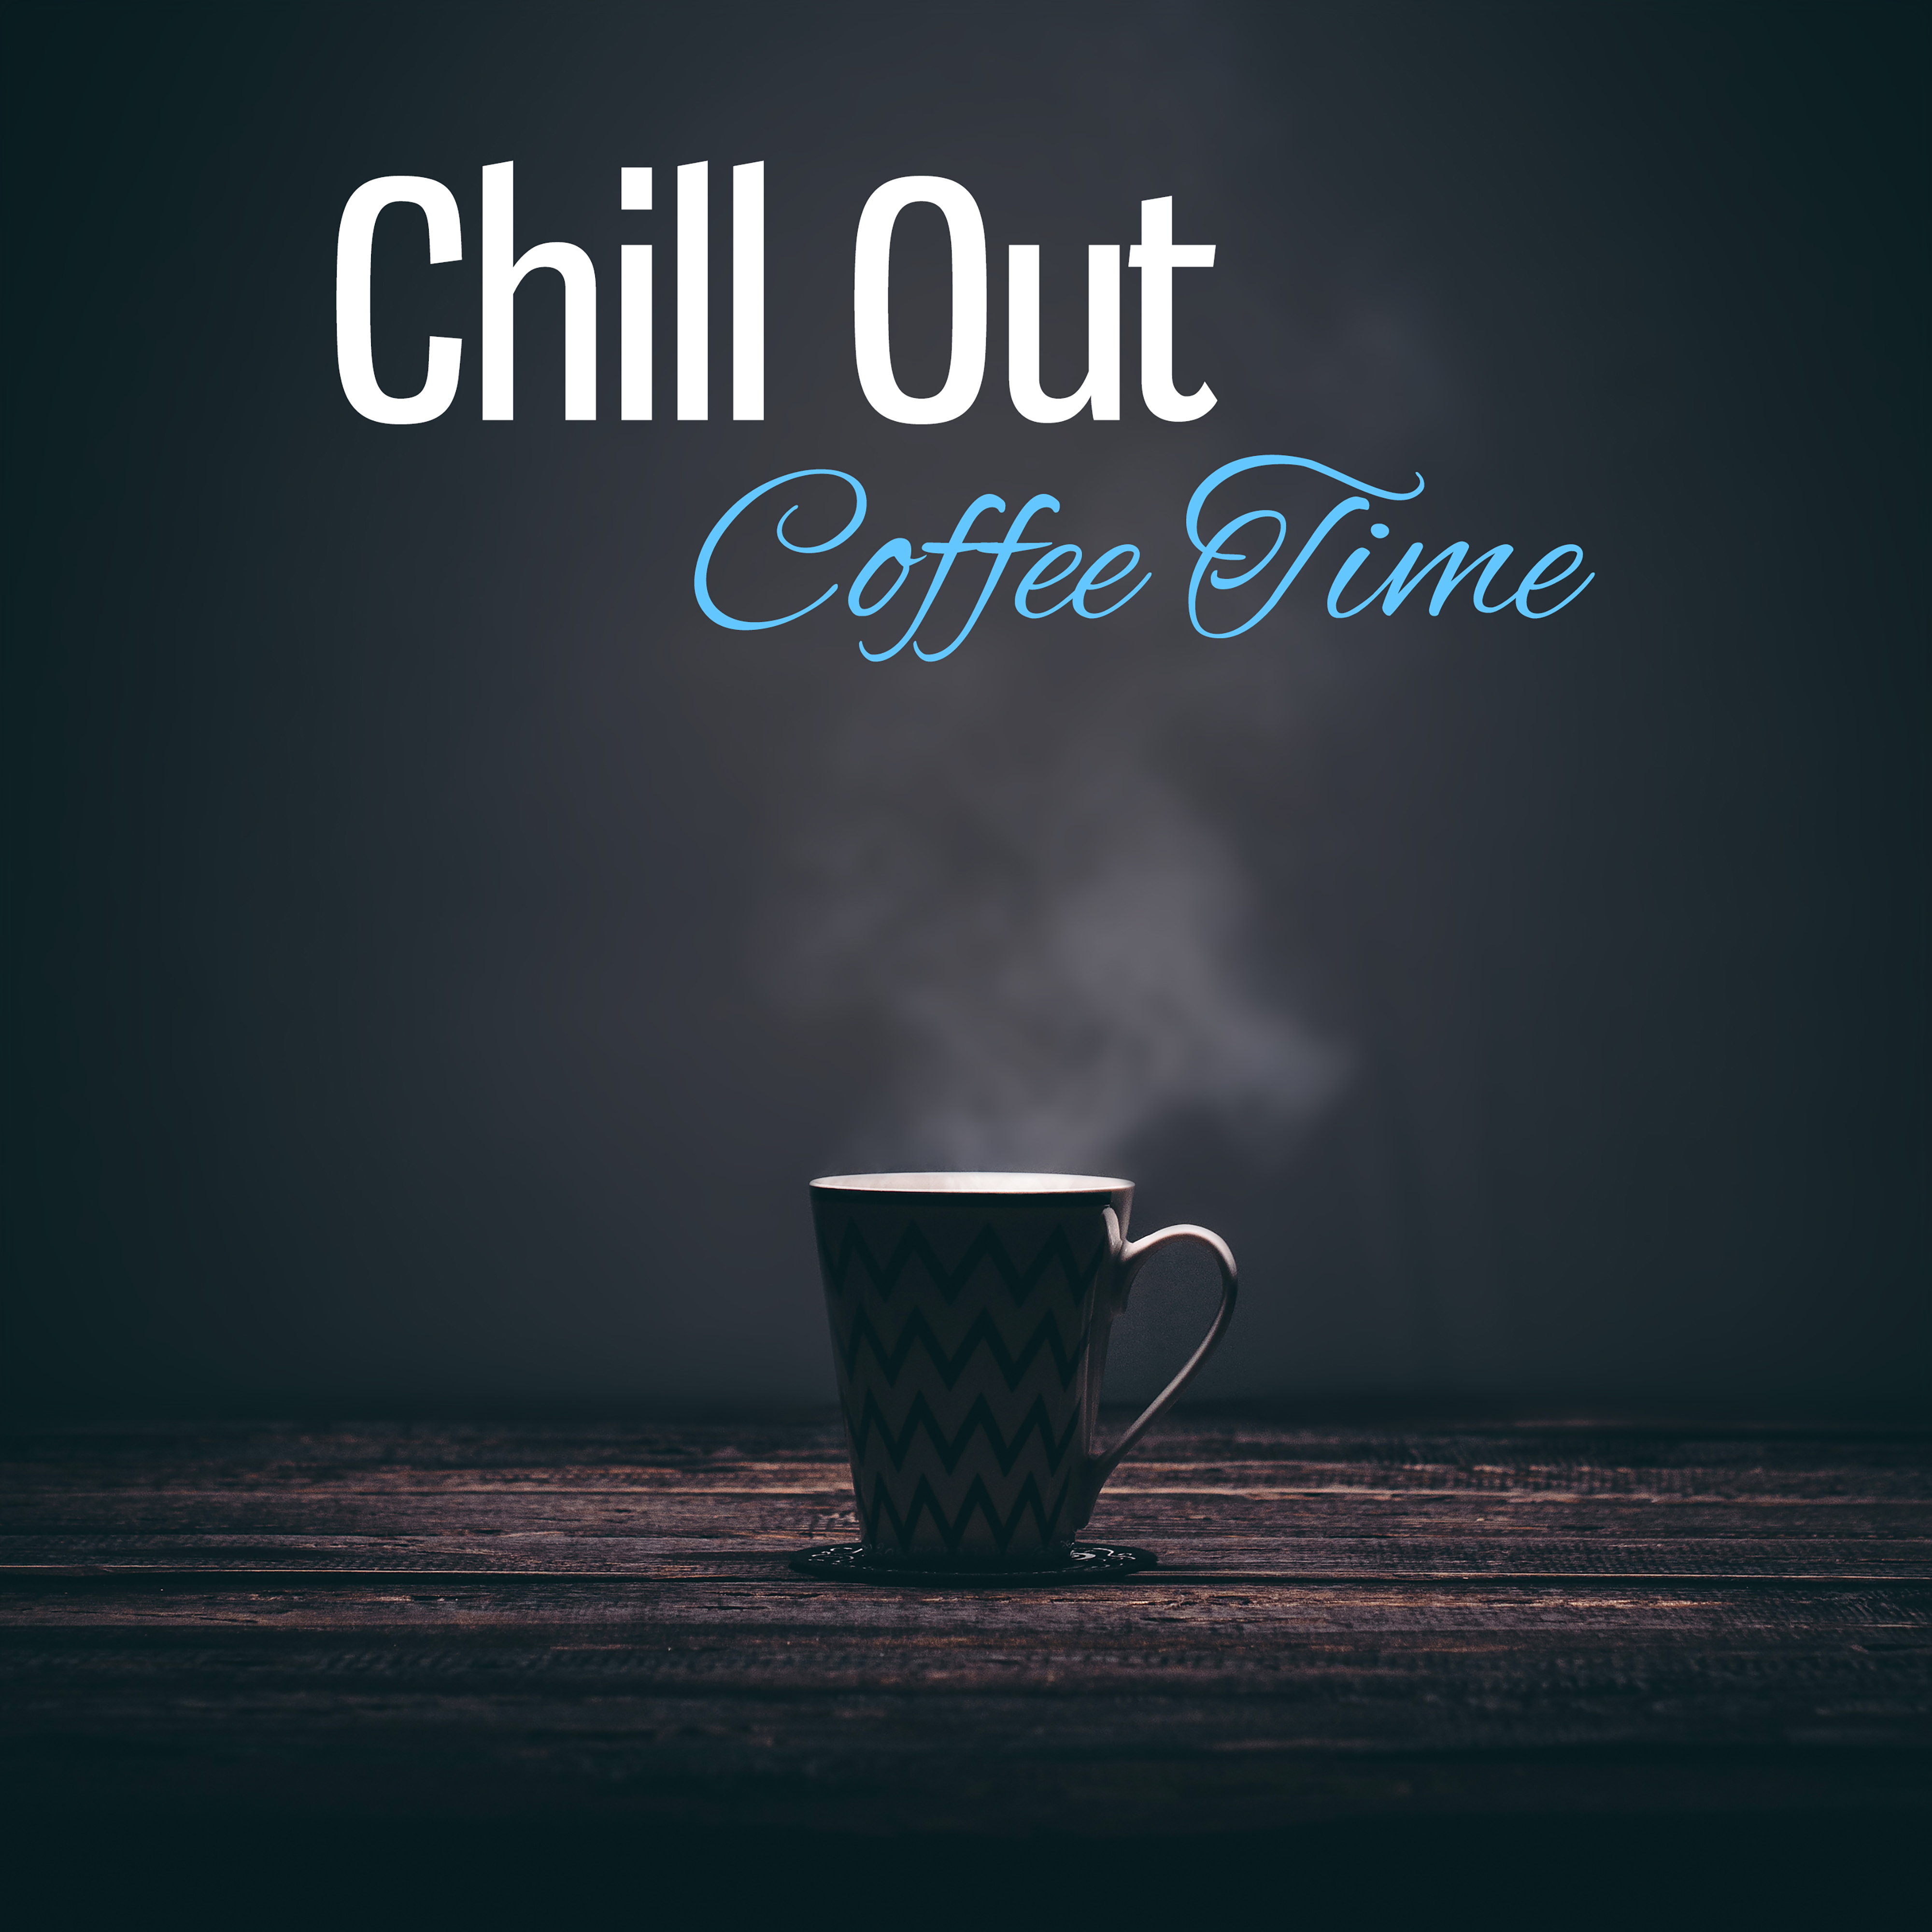 Chill Out Coffee Time – Buddha Chill, Ocean Dreams, Ibiza Lounge, Restaurant Music, Relaxation Songs